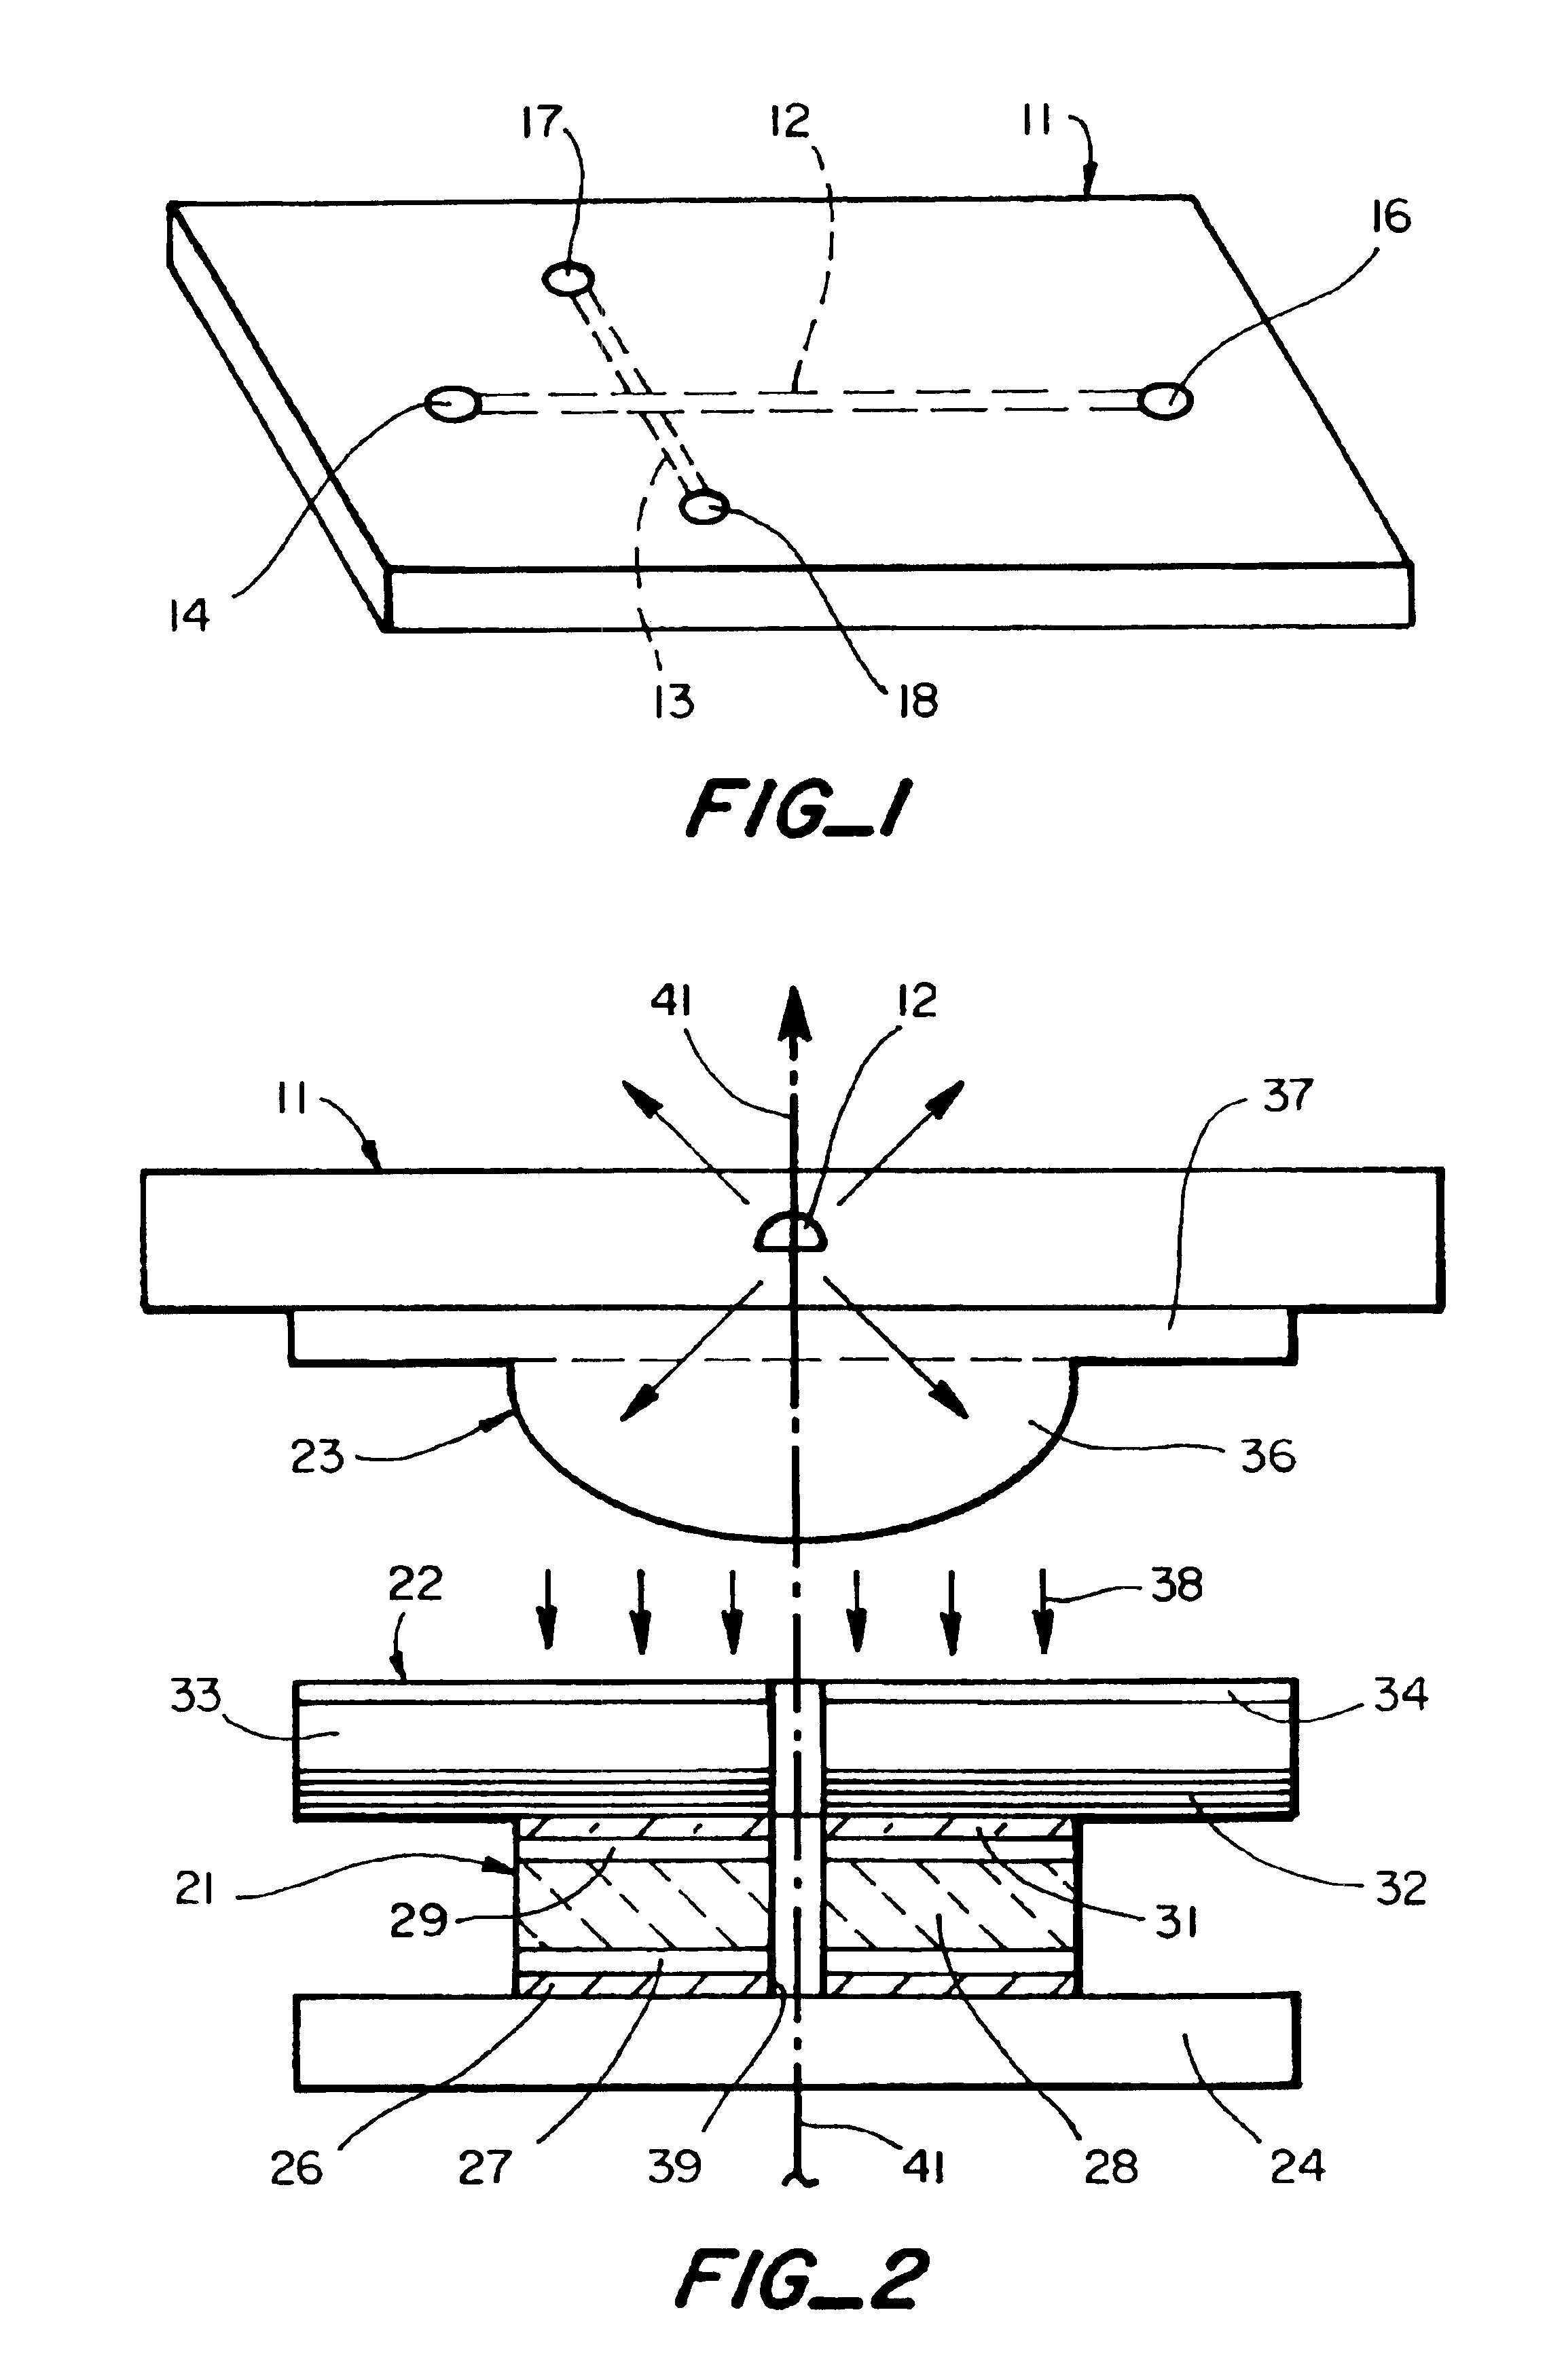 Solid-state detector and optical system for microchip analyzers